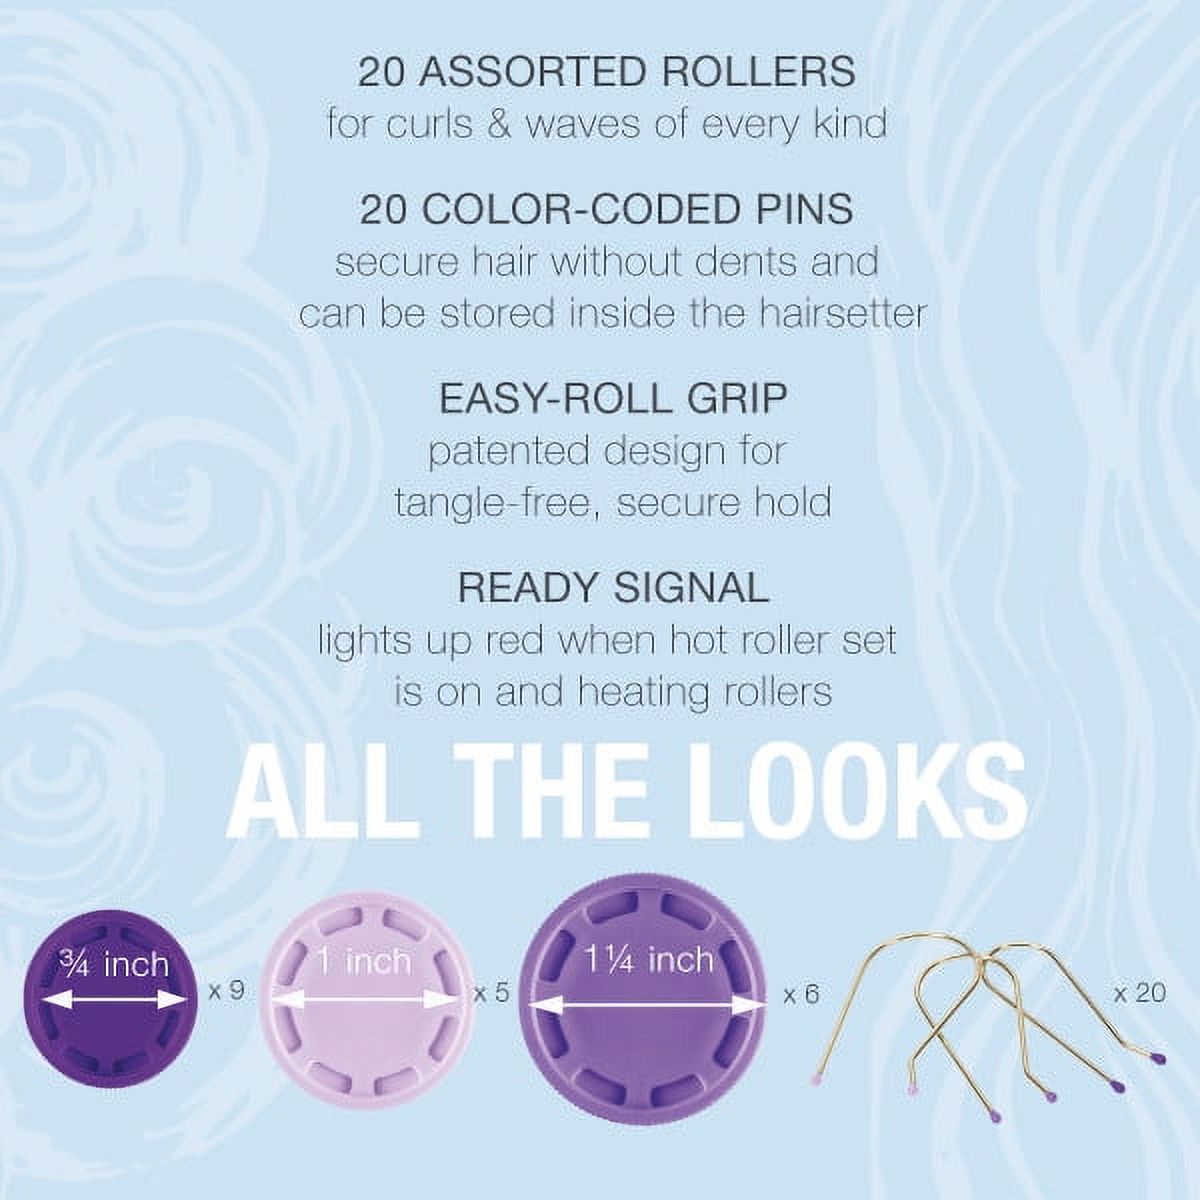 Conair EasyStart Hot Rollers, Create Curls and Waves That Last with 20 Assorted Hot Rollers and 20 Metal Pins, HS11RX - image 2 of 7